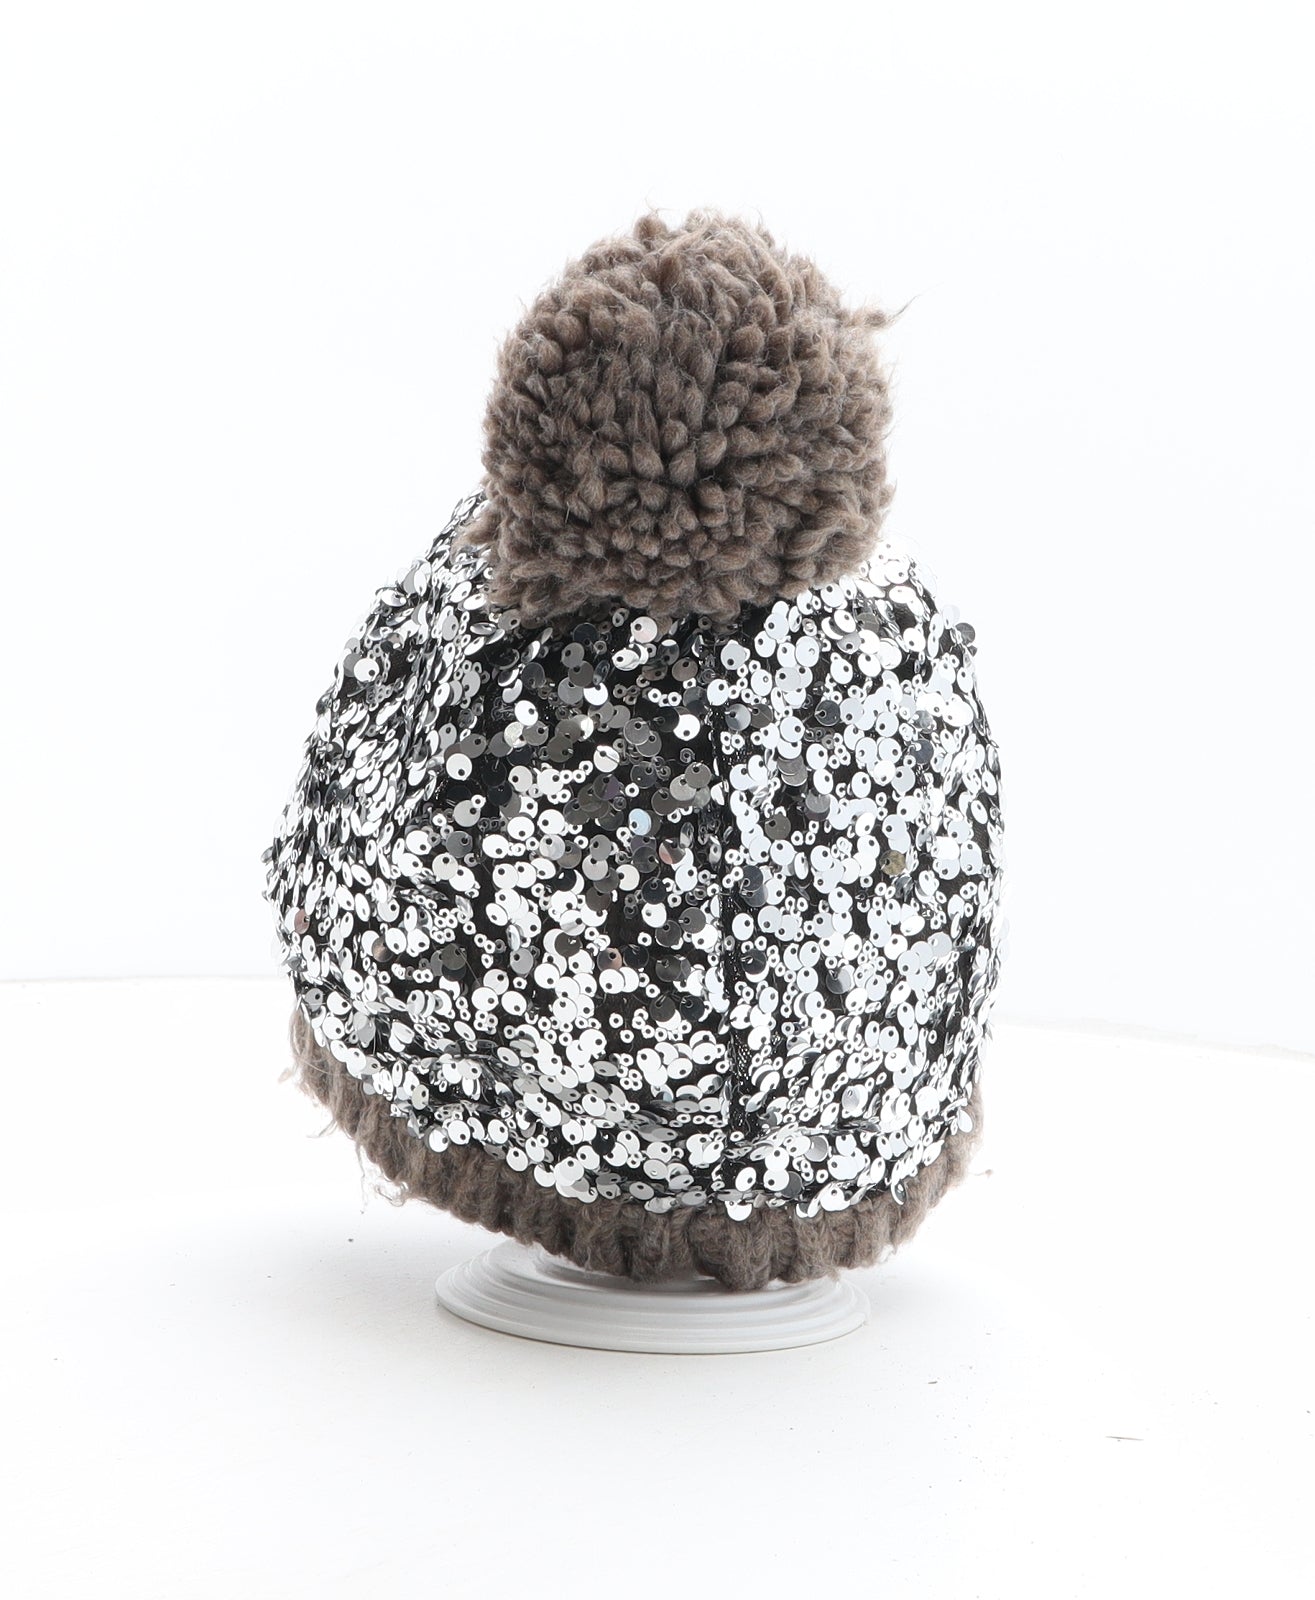 NEXT Womens Silver Acrylic Bobble Hat One Size